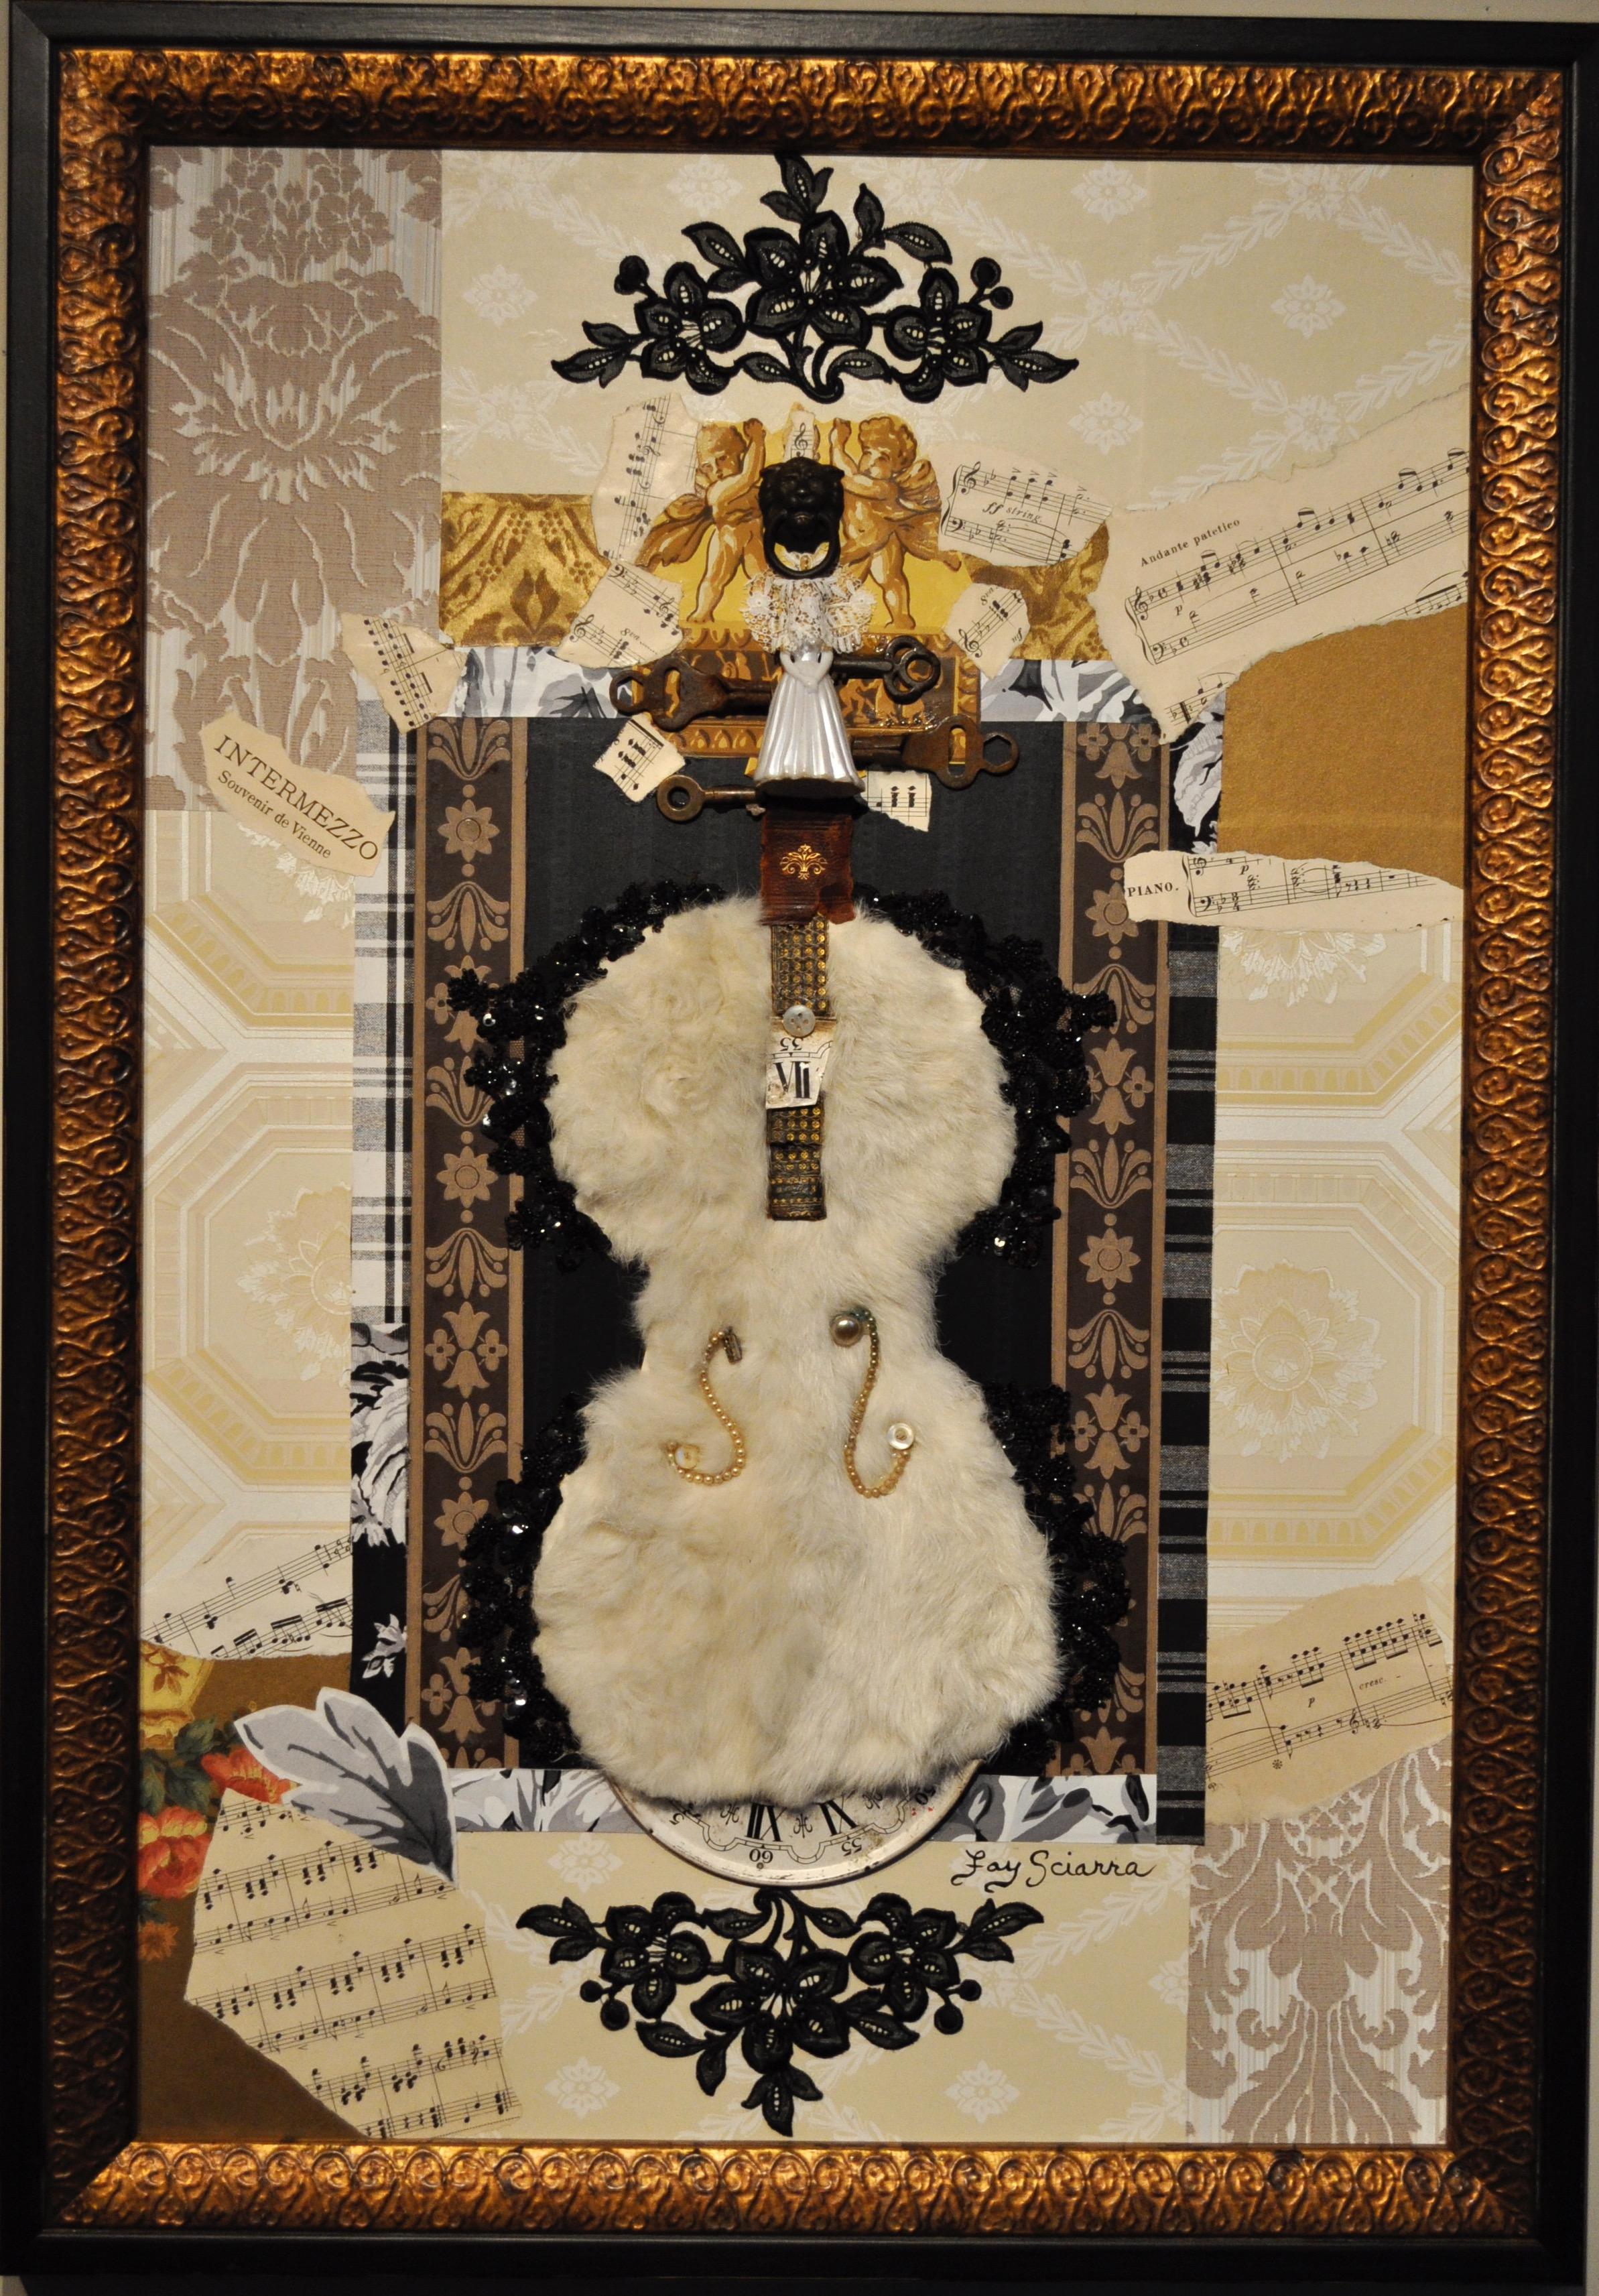 Wonderfully intricate mixed-media collages having cream and black and gold vintage wallpaper, authentic mink fur, leather book bindings, porcelain and plastic figurines, and other ephemera. The title of the pair is Bride & Groom, for obvious